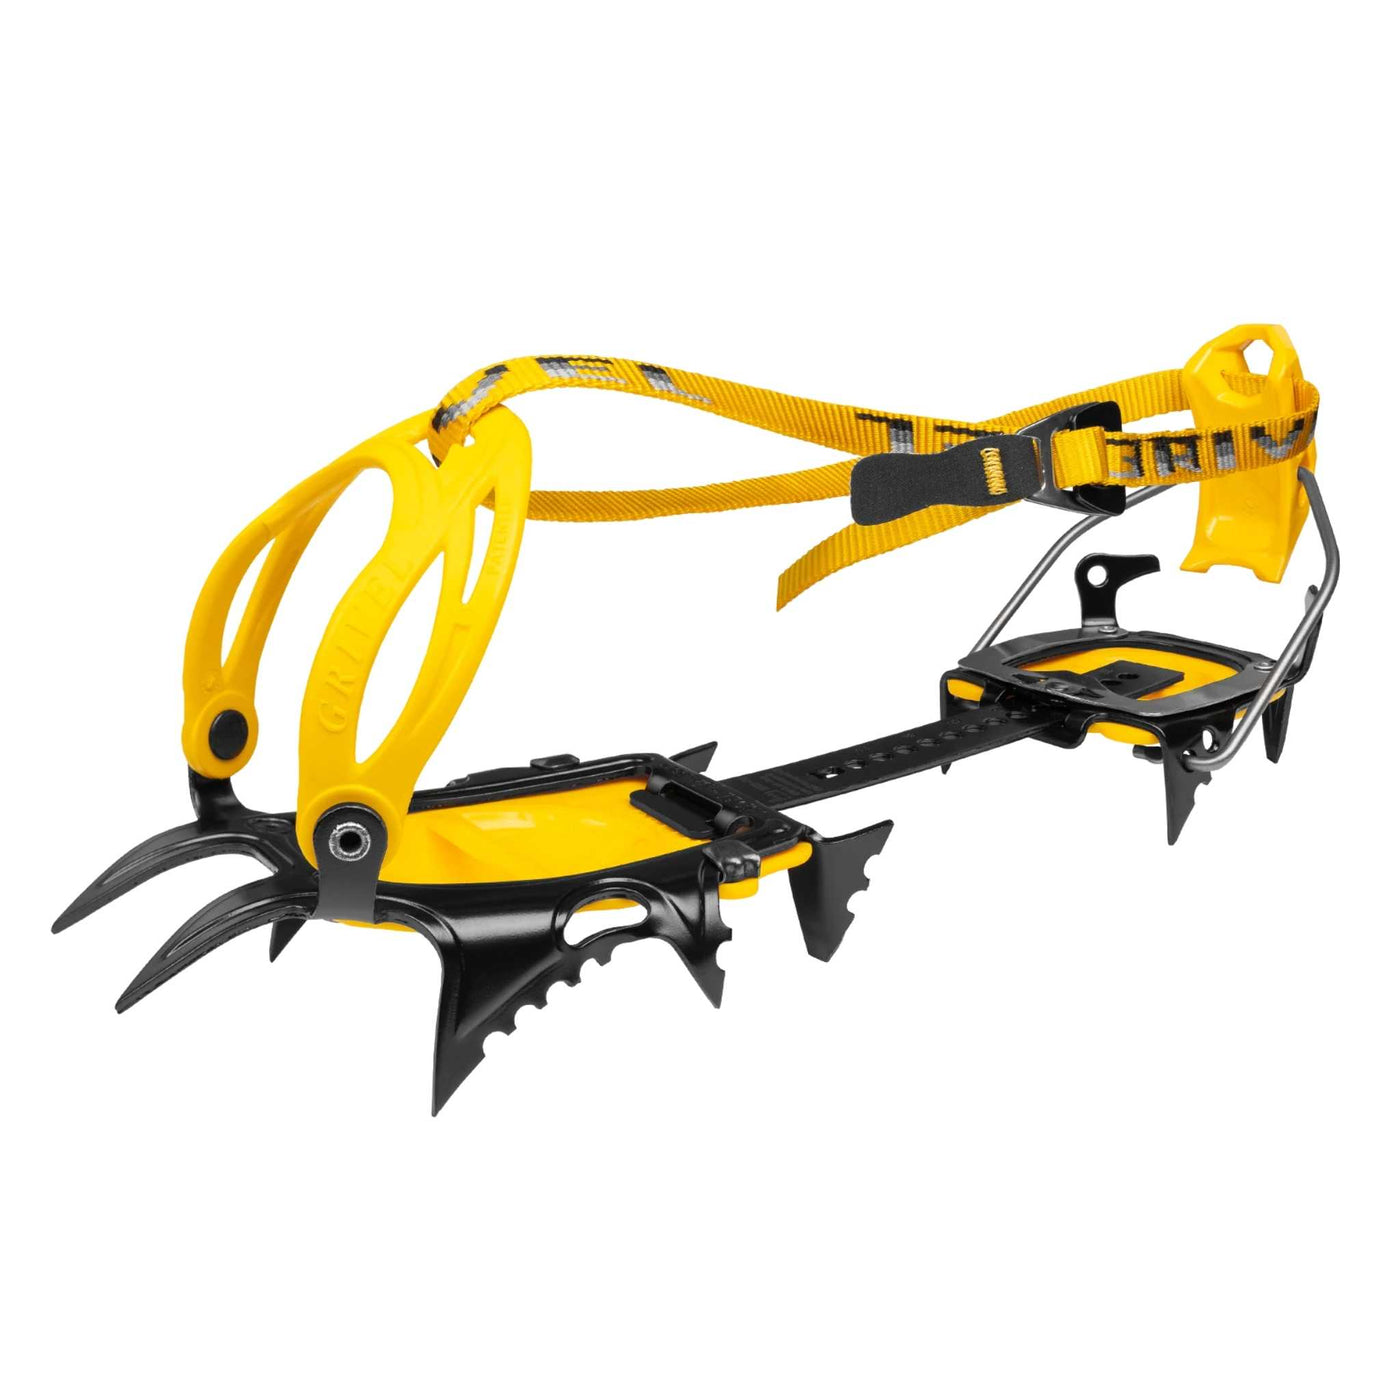 Grivel AirTech Evo Crampon -  New Matic | Technical Mountaineering Crampons | Further Faster Christchurch NZ 